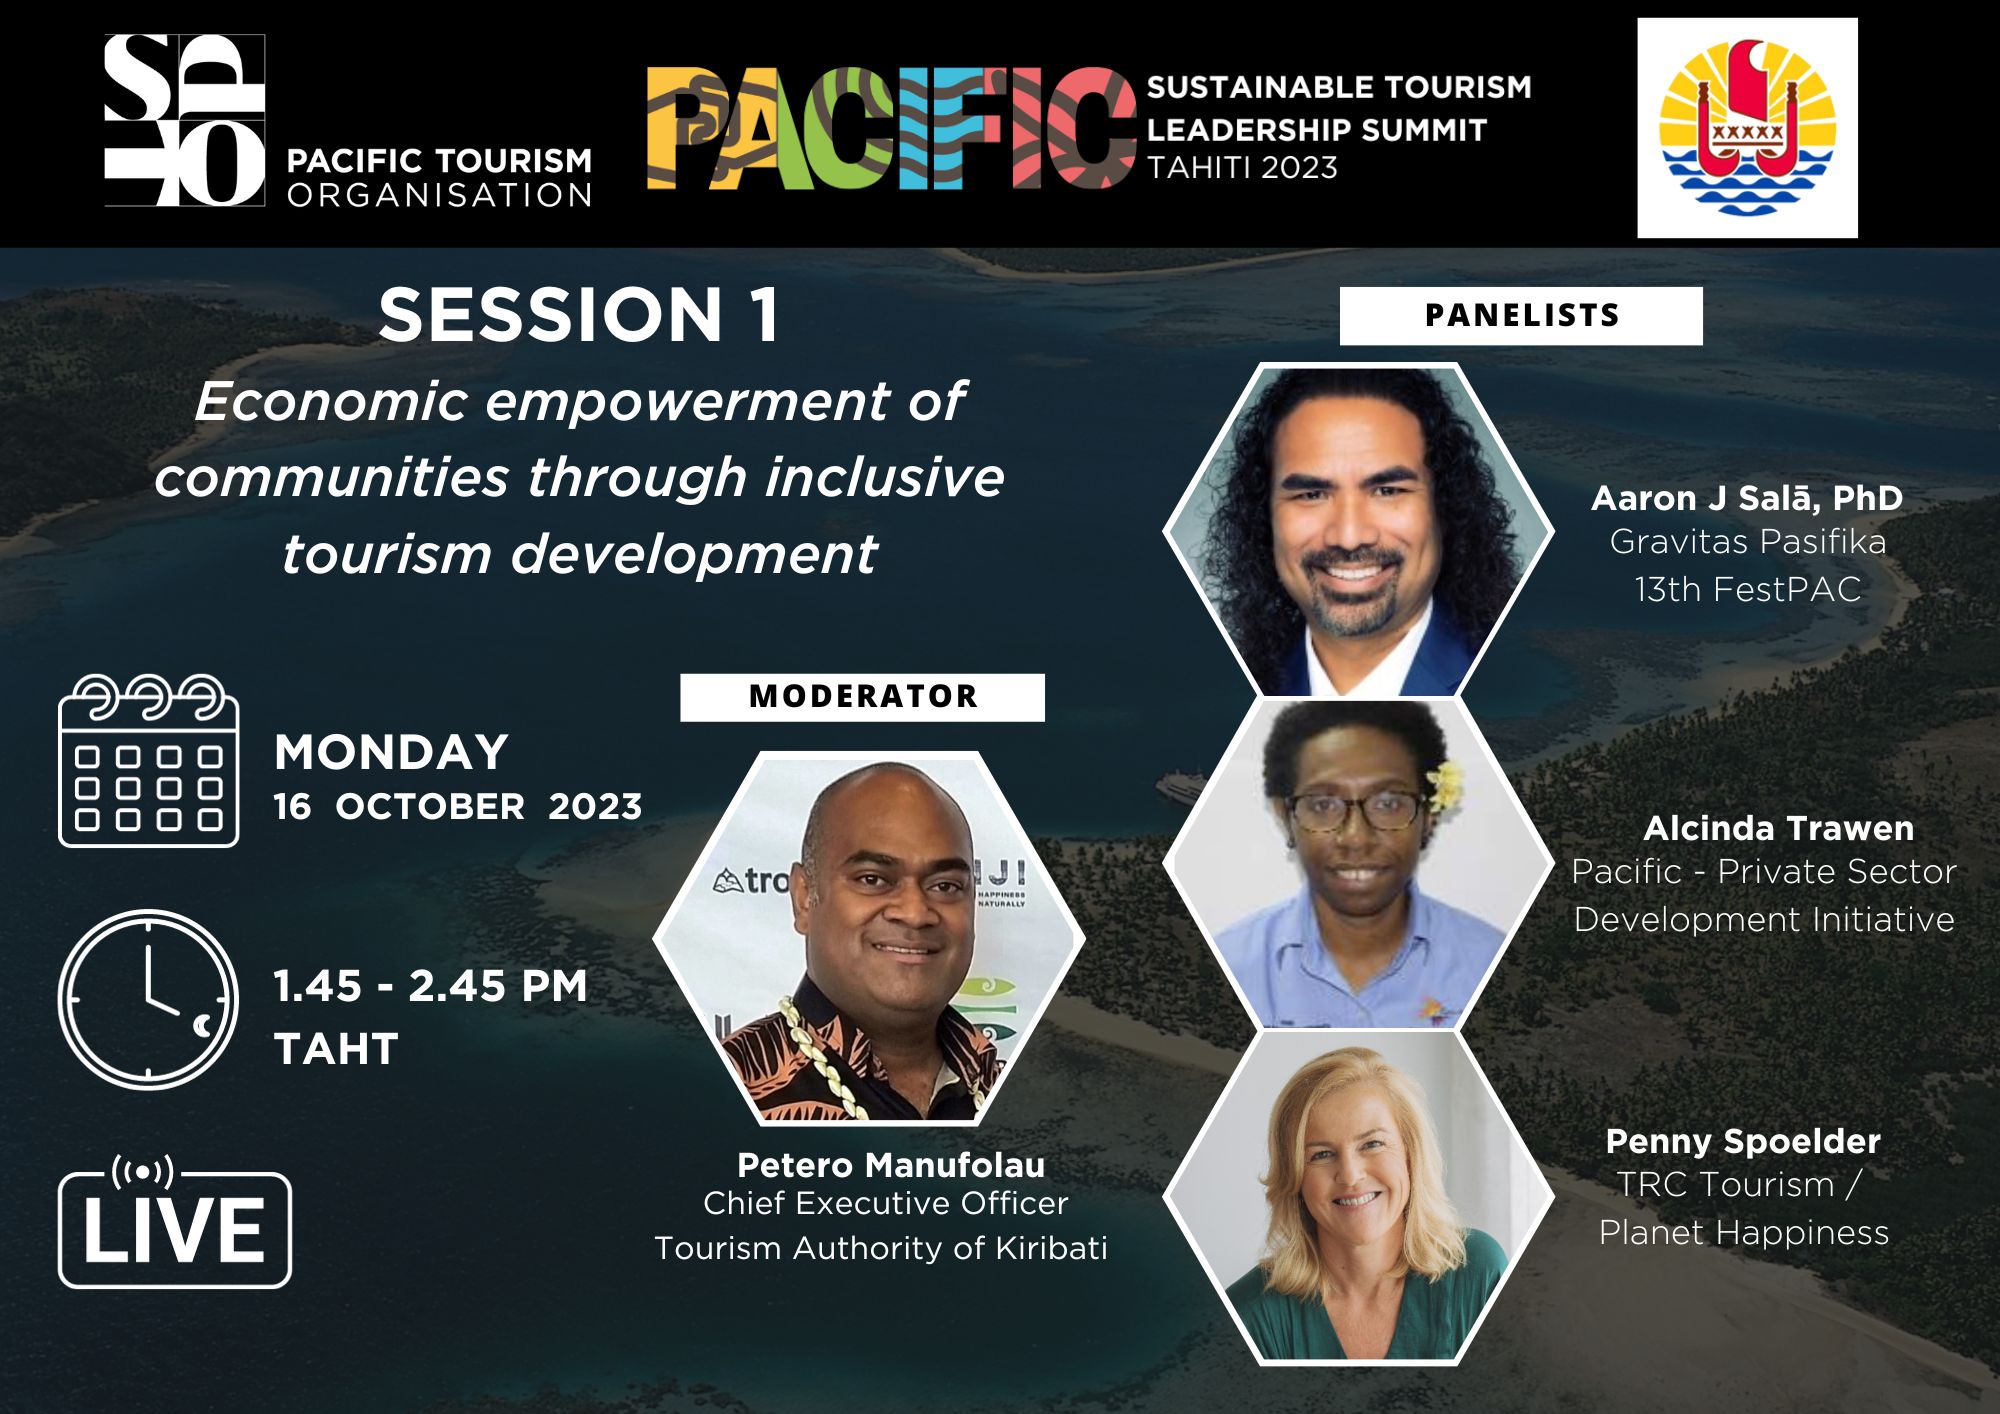 Session 1: Economic empowerment of communities through inclusive tourism development. Featuring Penny Spoelder in discussion with moderation CEO Tourism Authority of Kiribati. 